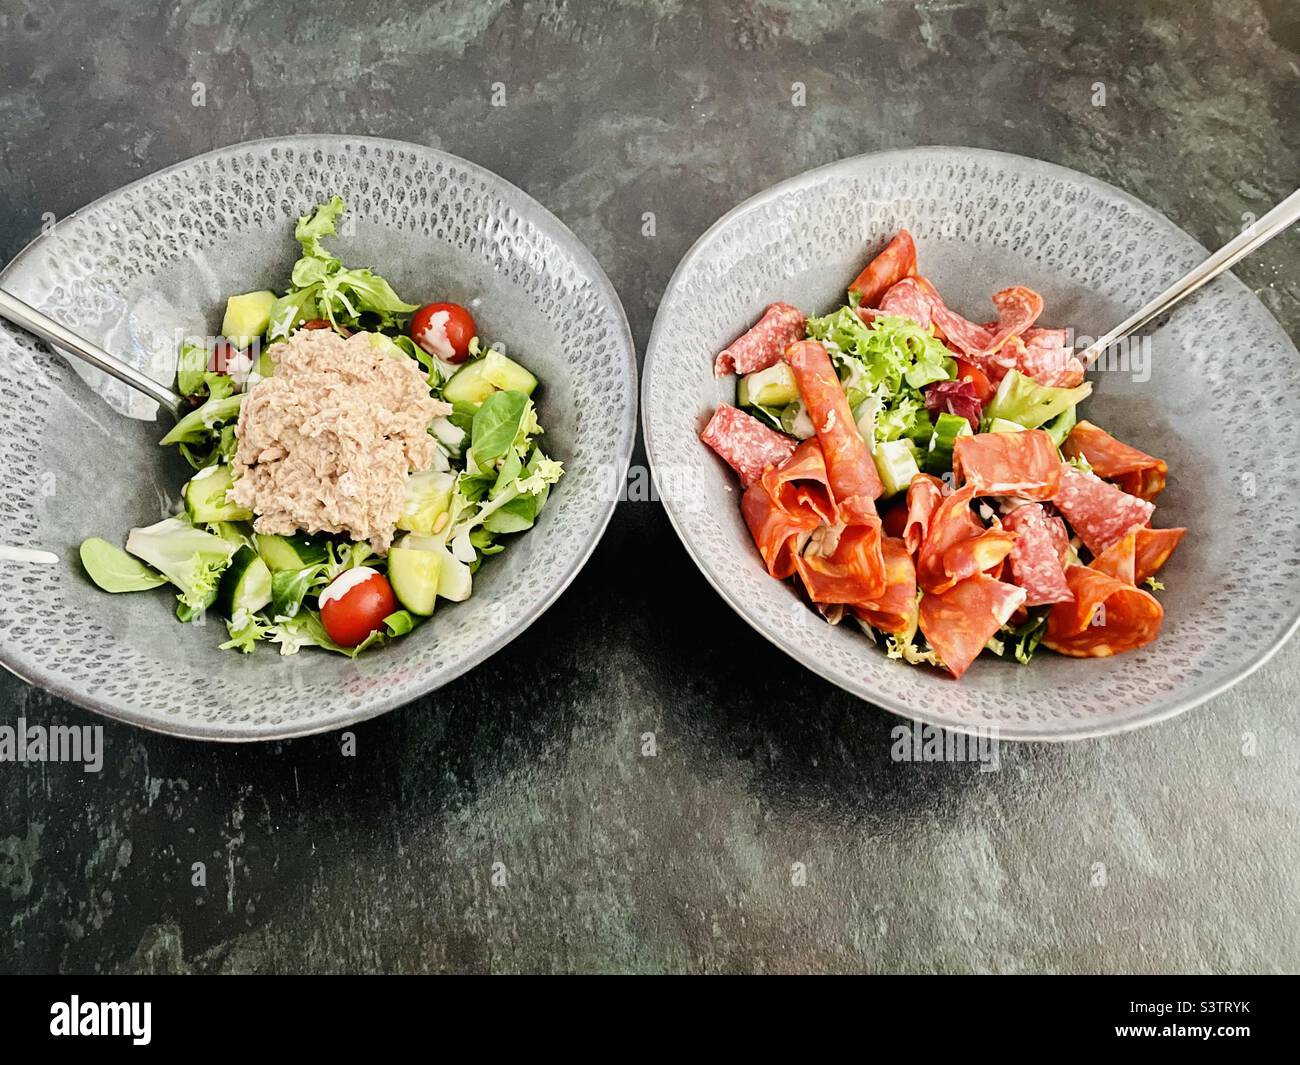 Lunch Date. Tuna salad and cured meat salad. Stock Photo